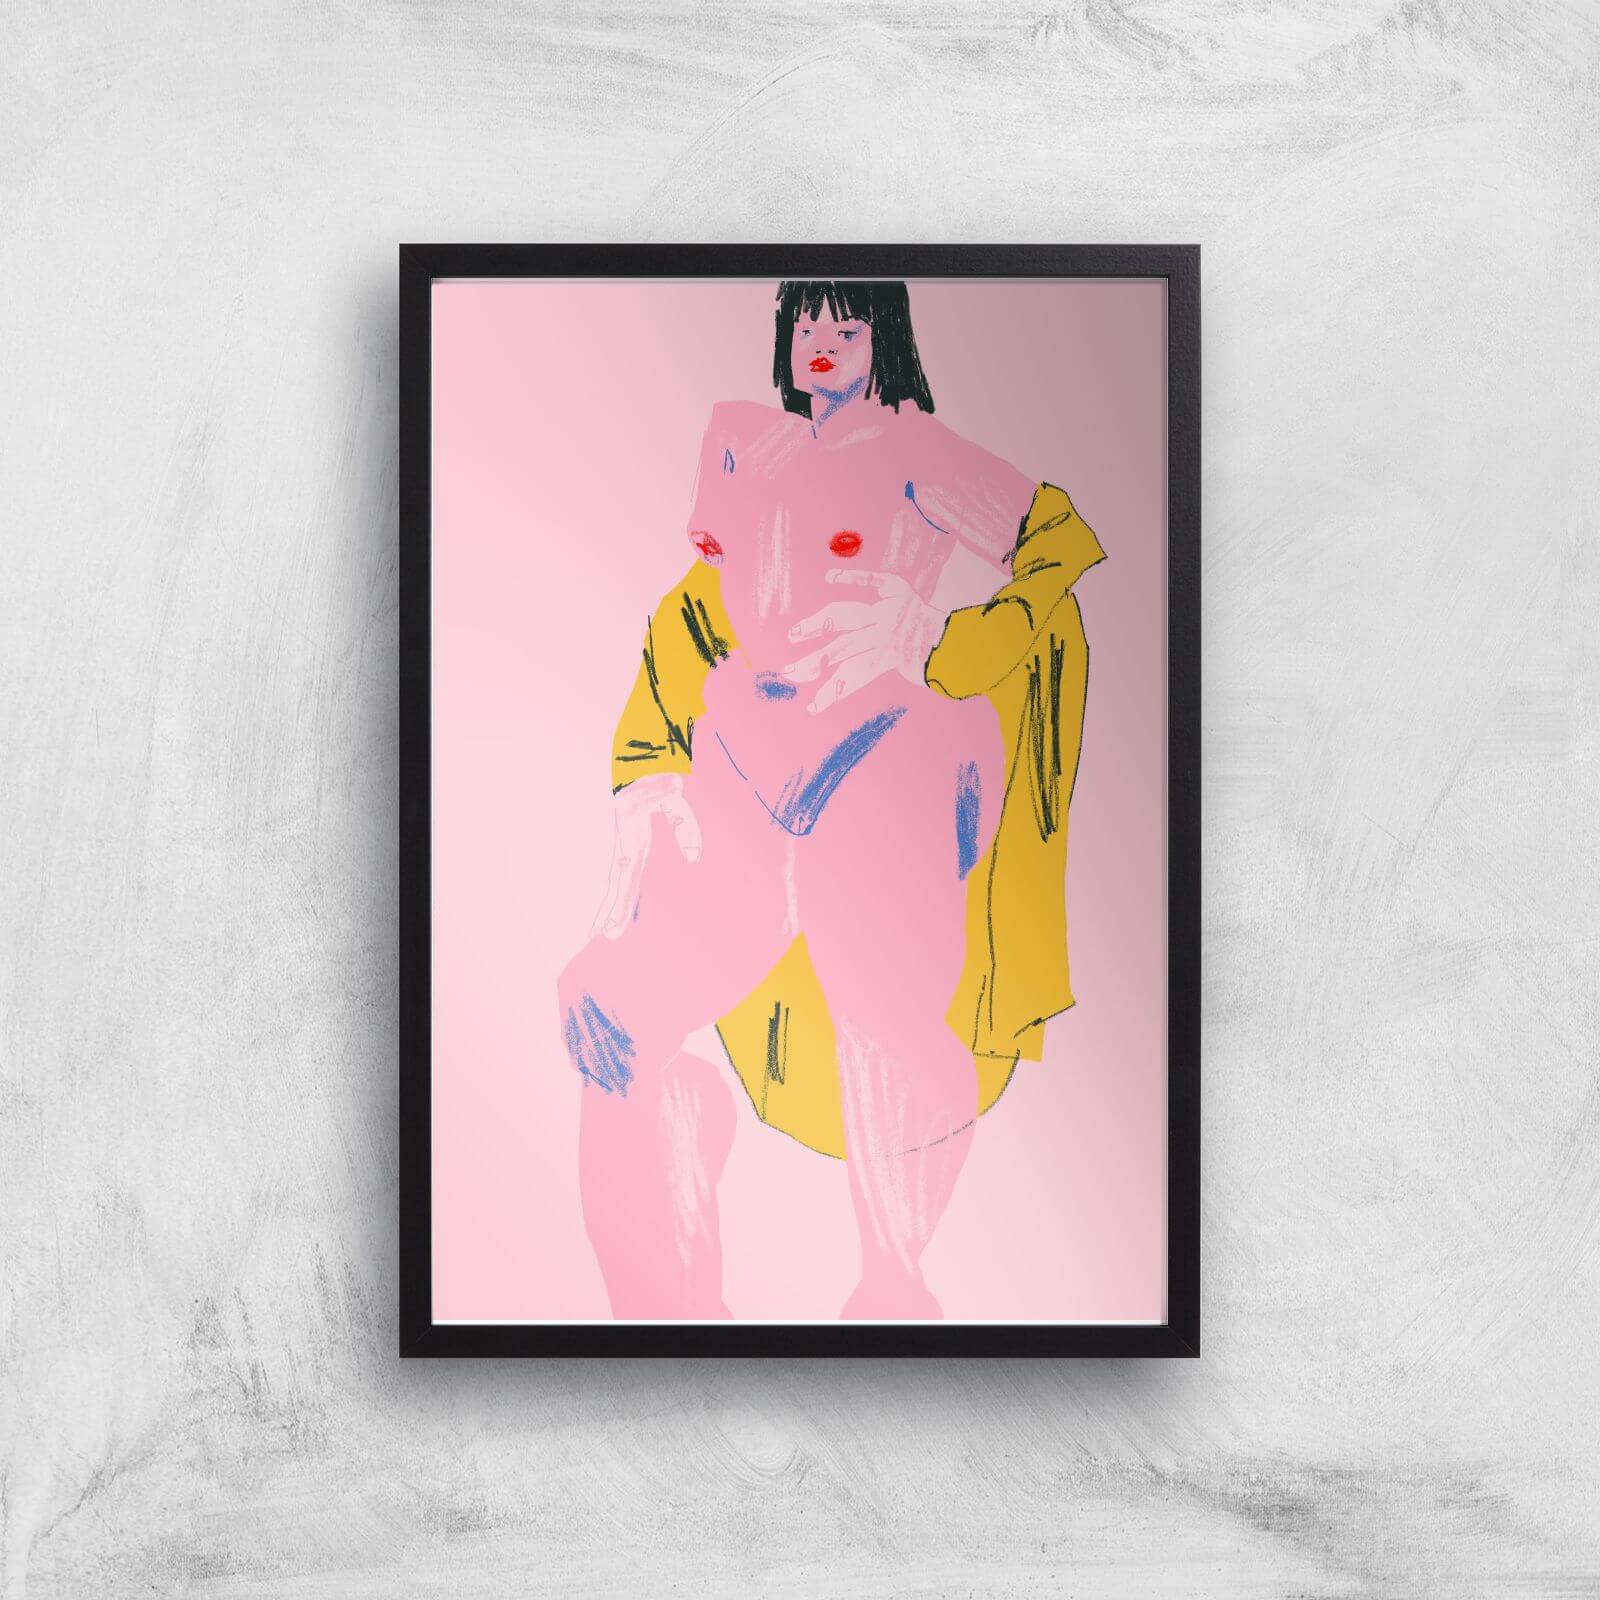 Pink & Yellow Nude Giclee Art Print - A4 - Black Frame